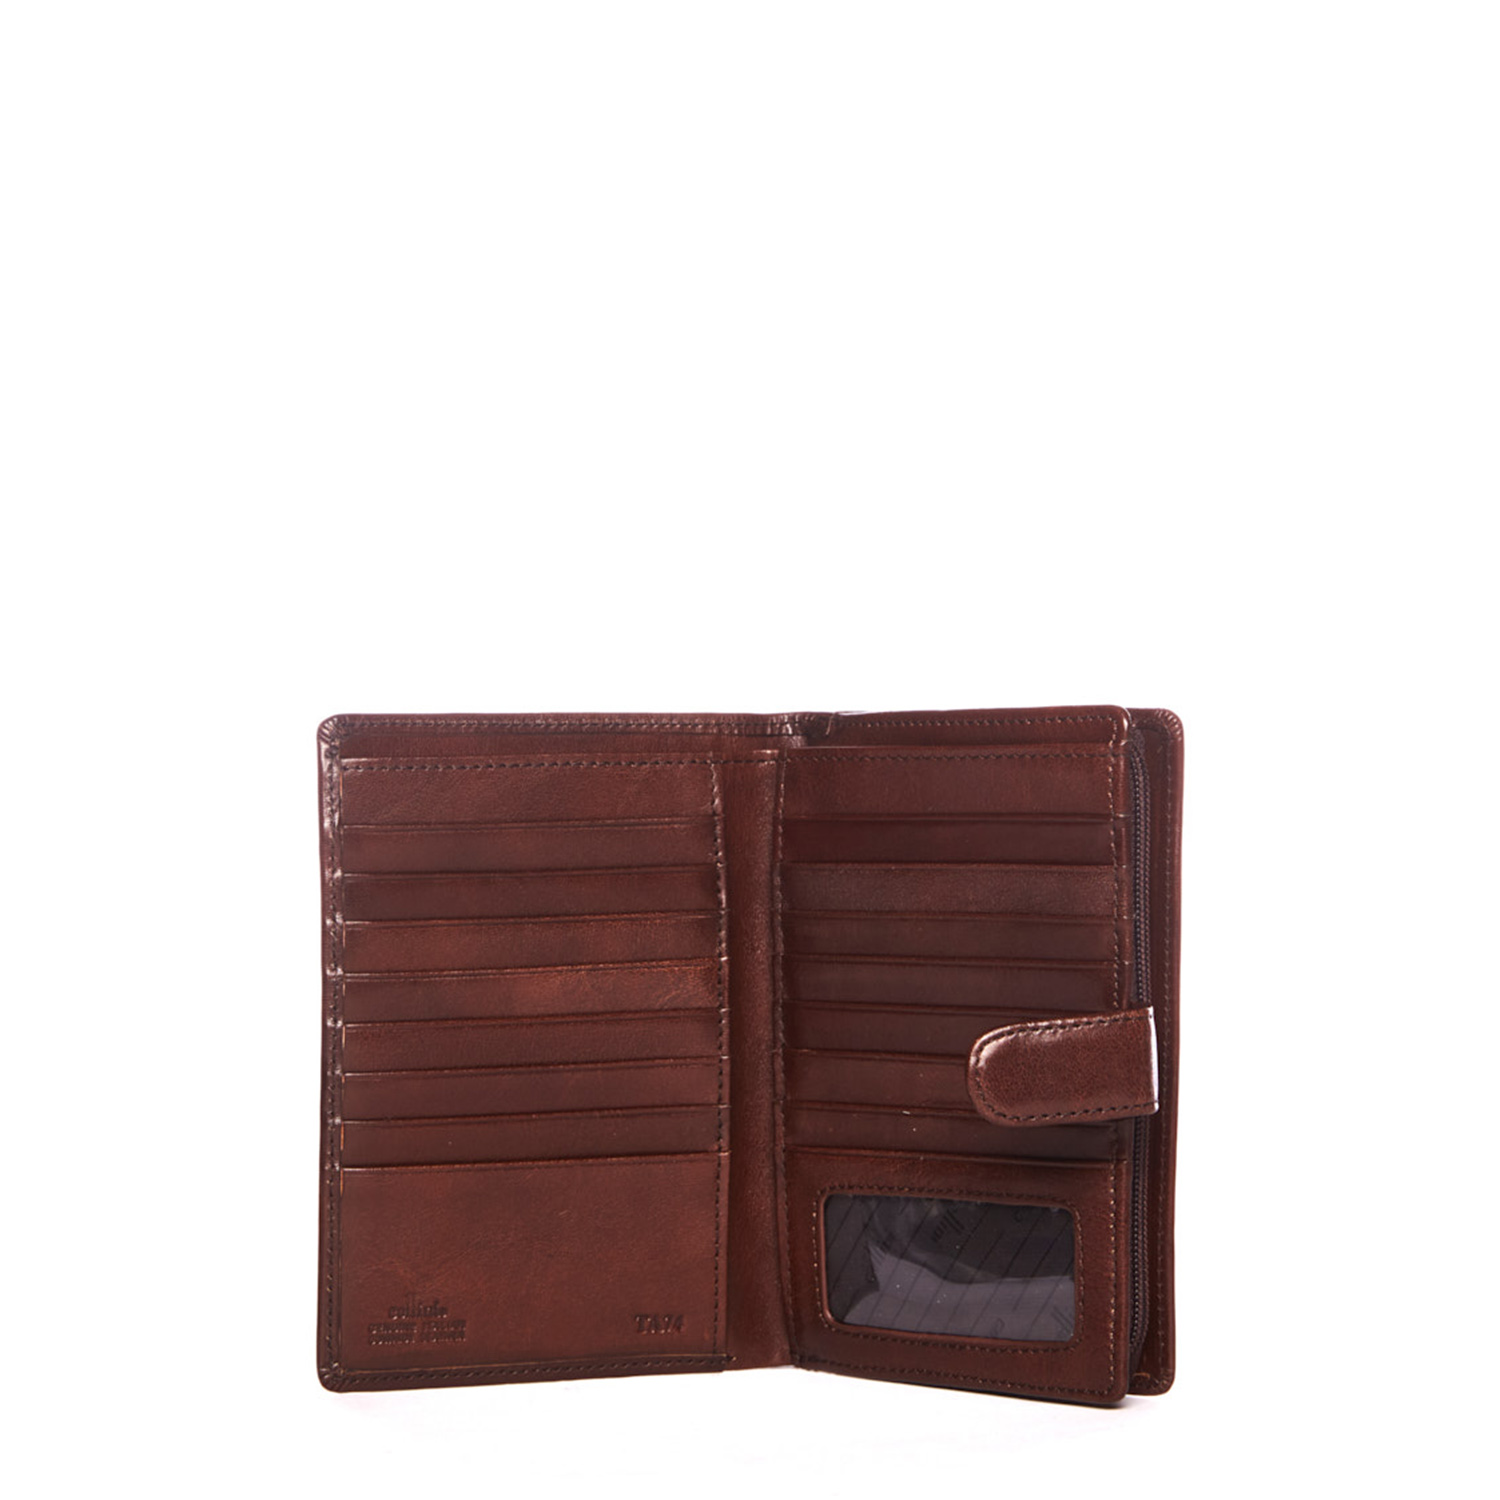 Tuscany Large Book Wallet CW0074 - Accessories & Style